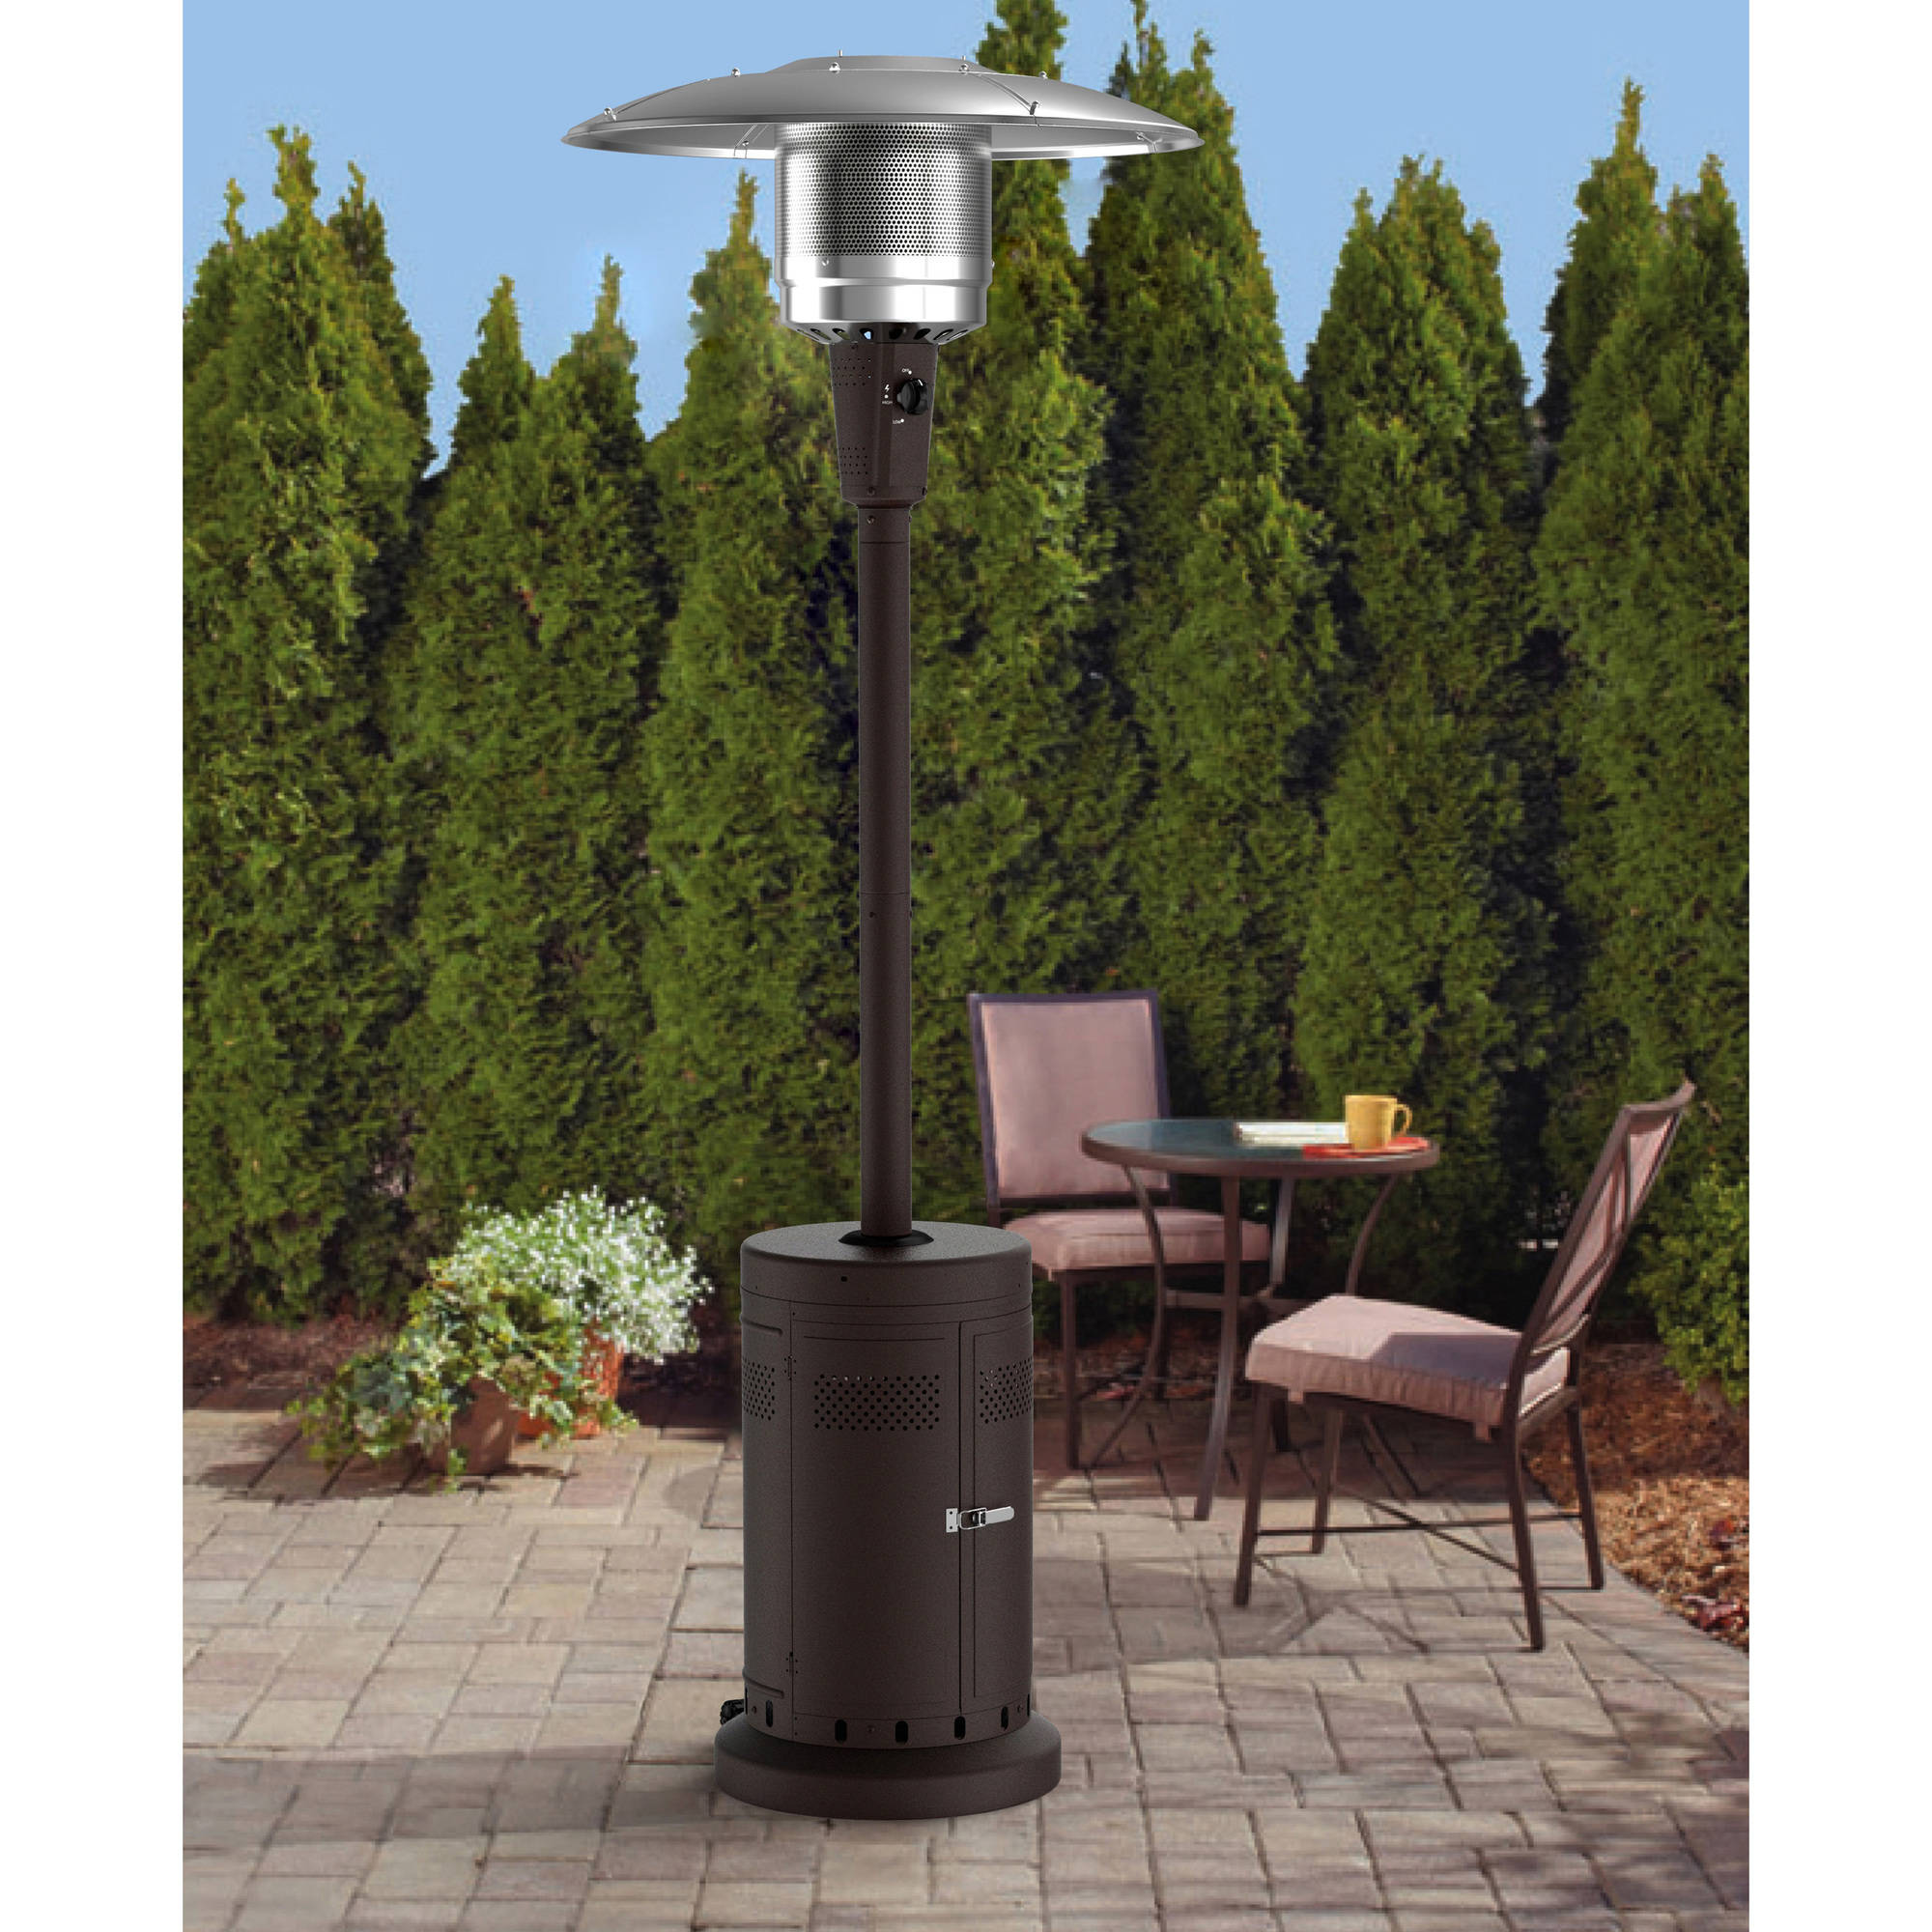 Mainstays Large Outdoor Patio Heater, Powder Coat Brown - image 1 of 4